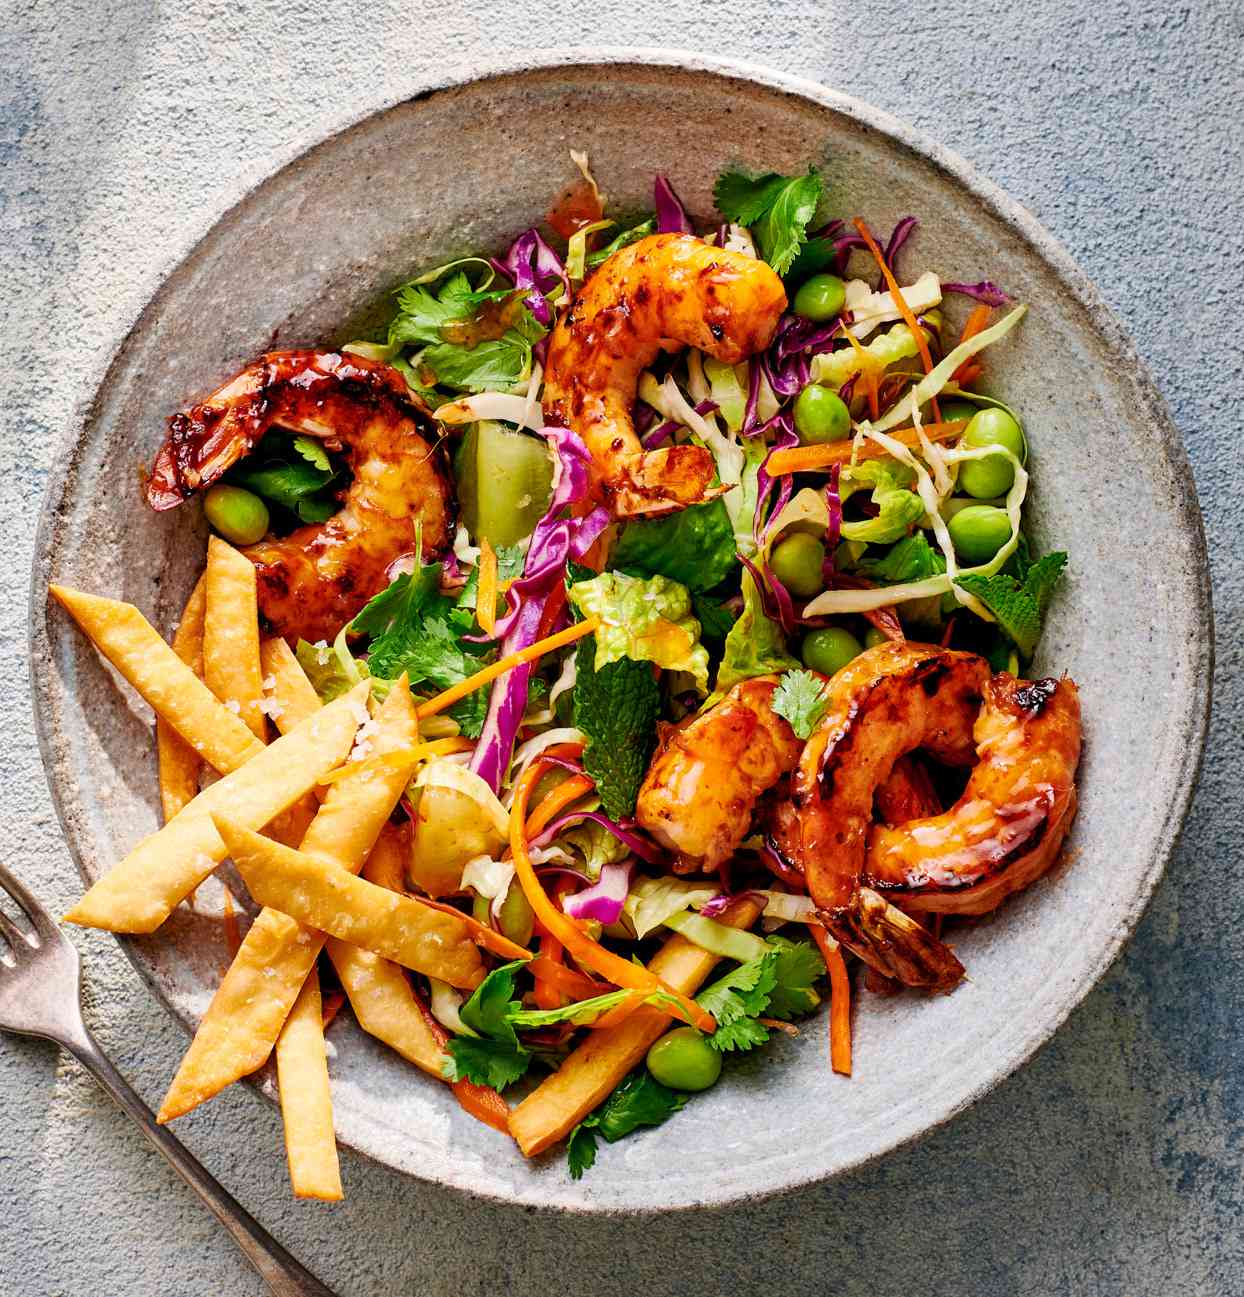 Gingery Shrimp Salad with Crispies